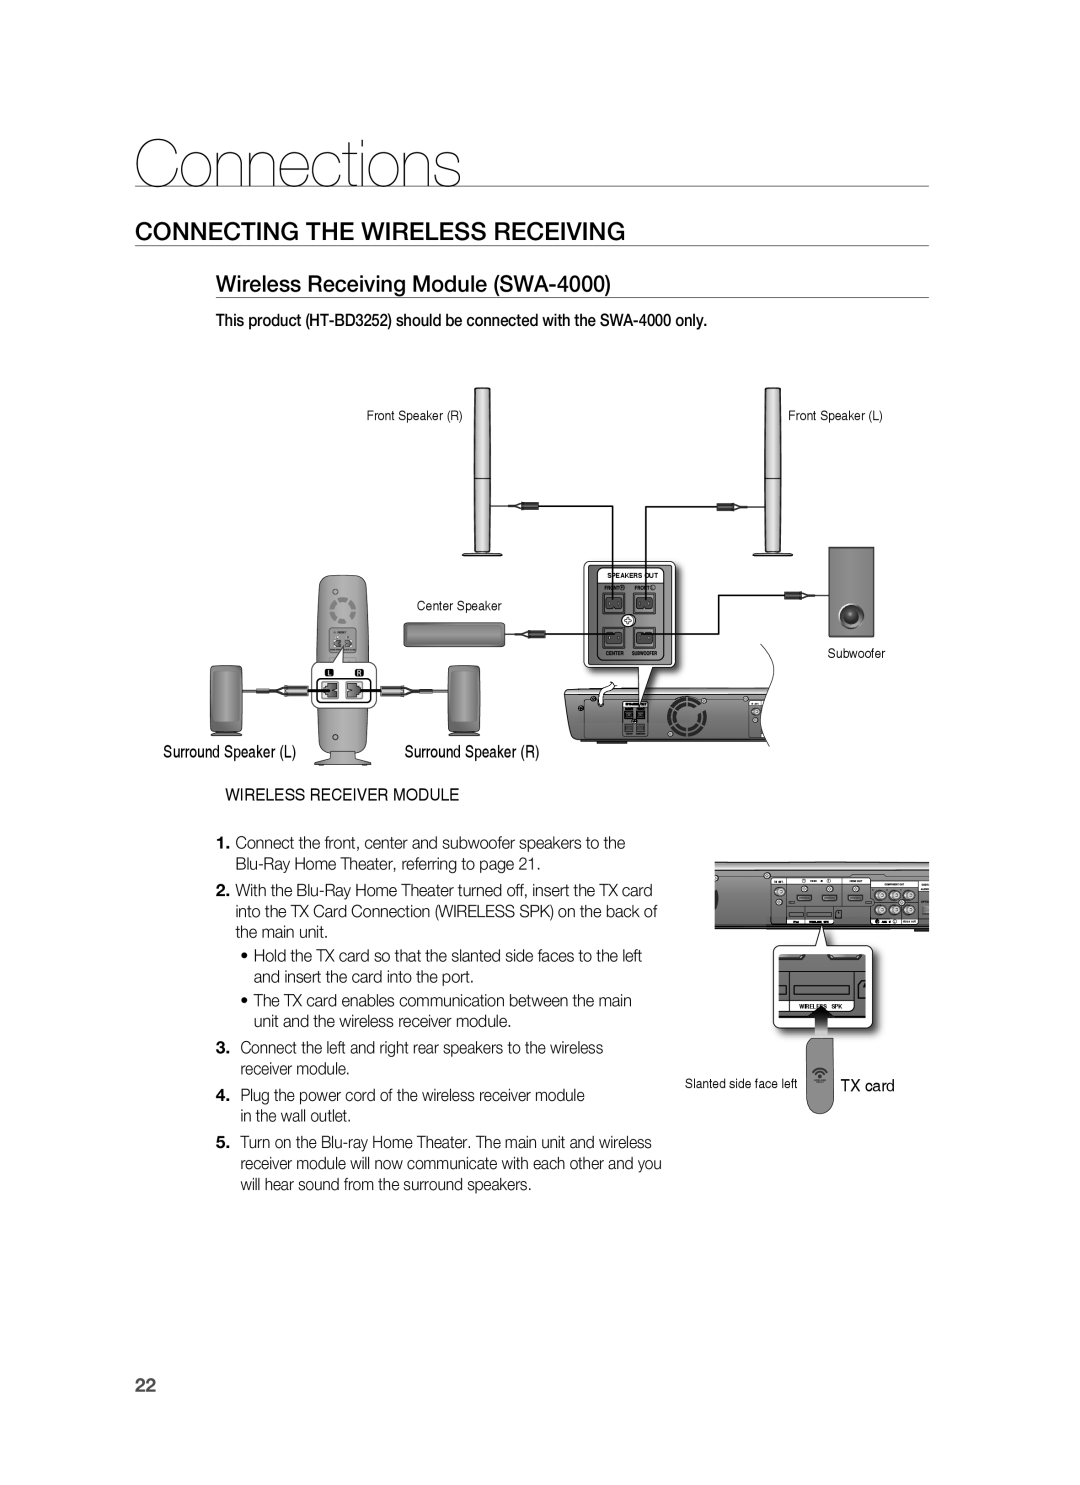 Samsung HT-BD3252 user manual Connecting The Wireless Receiving, Wireless Receiving Module SWA-4000, Connections 